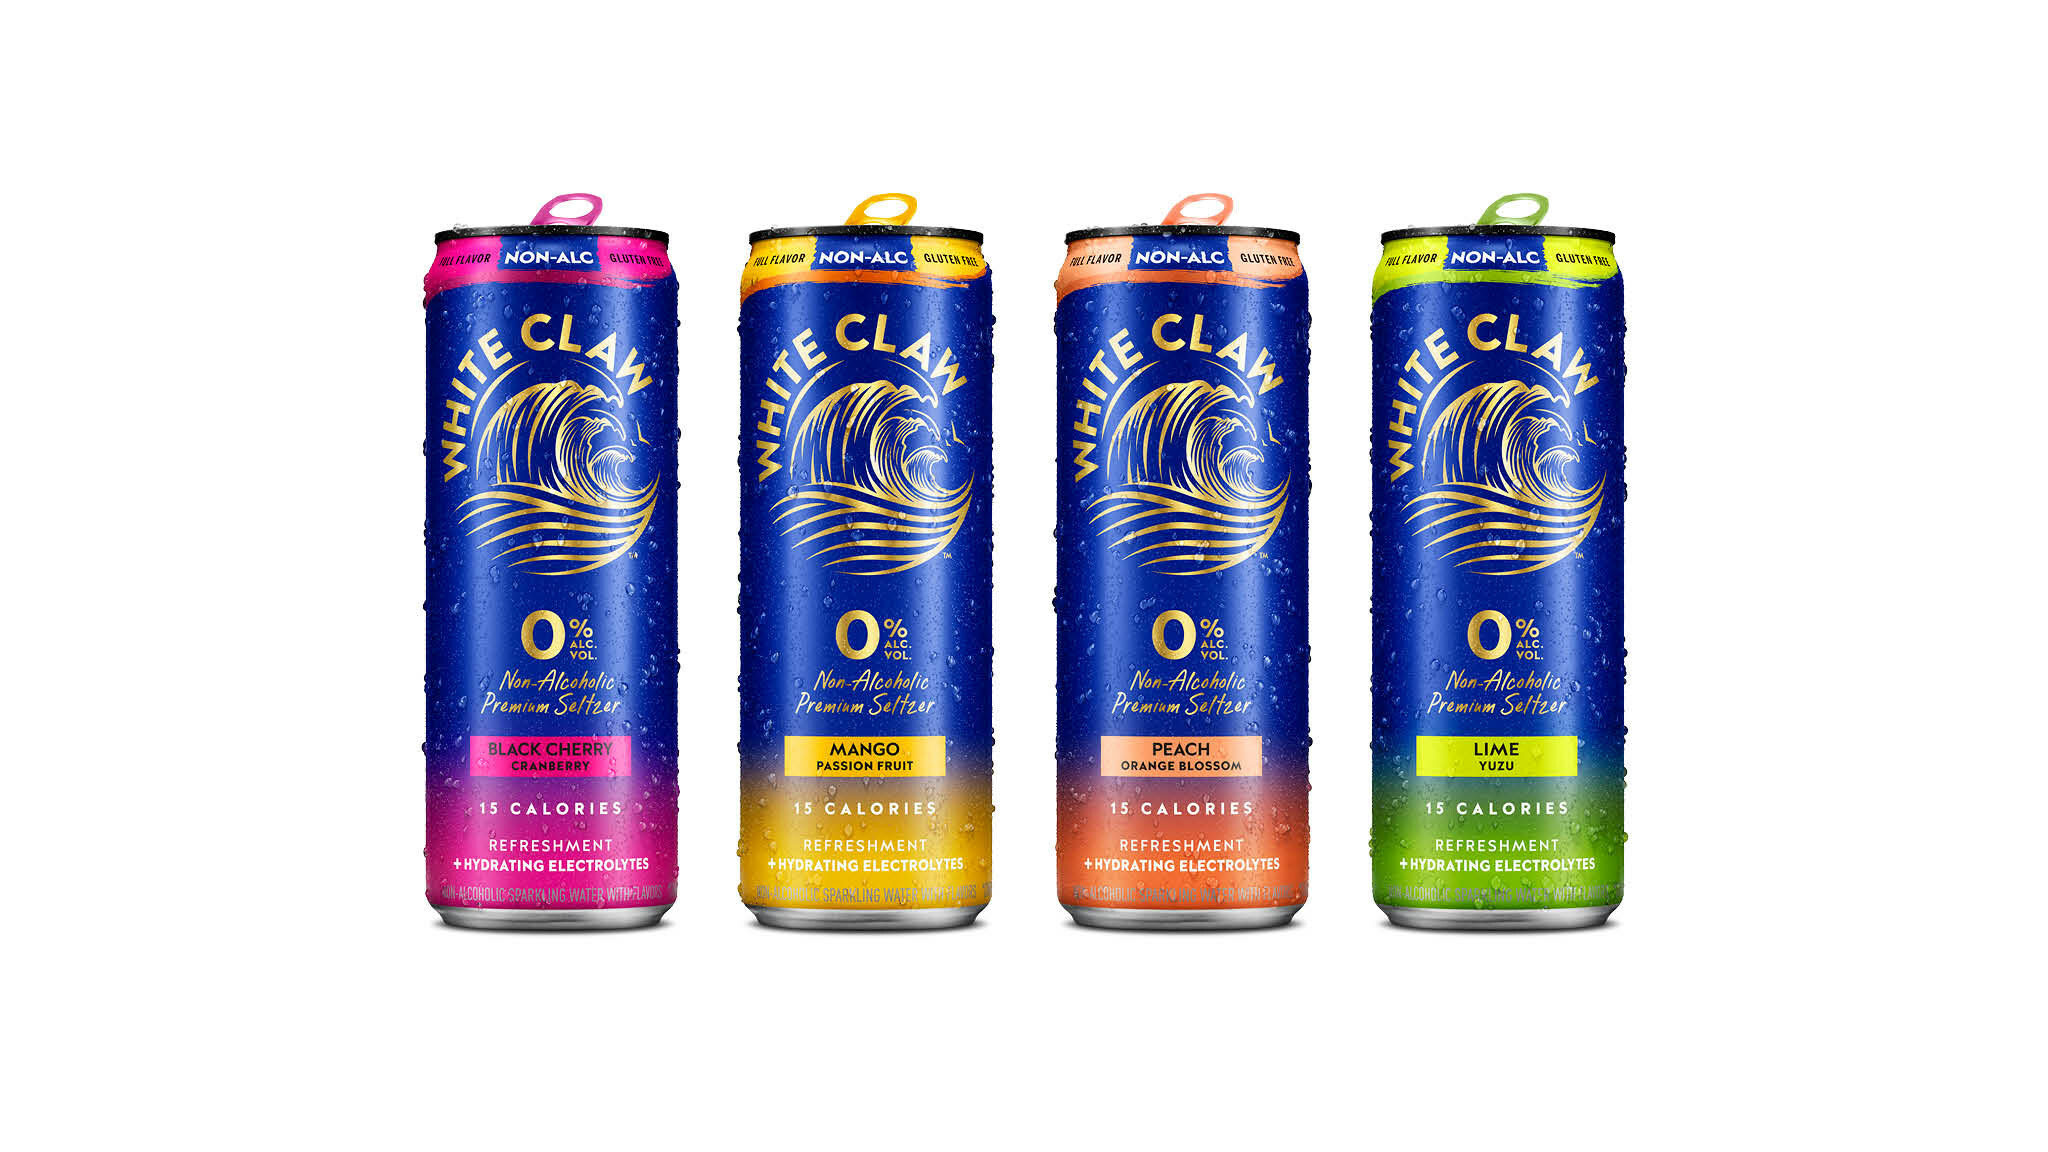 https://www.beveragedaily.com/var/wrbm_gb_food_pharma/storage/images/publications/food-beverage-nutrition/beveragedaily.com/article/2023/12/08/white-claw-launches-electrolyte-enhanced-0-alcohol-seltzer/17001621-1-eng-GB/White-Claw-launches-electrolyte-enhanced-0-Alcohol-seltzer.jpg